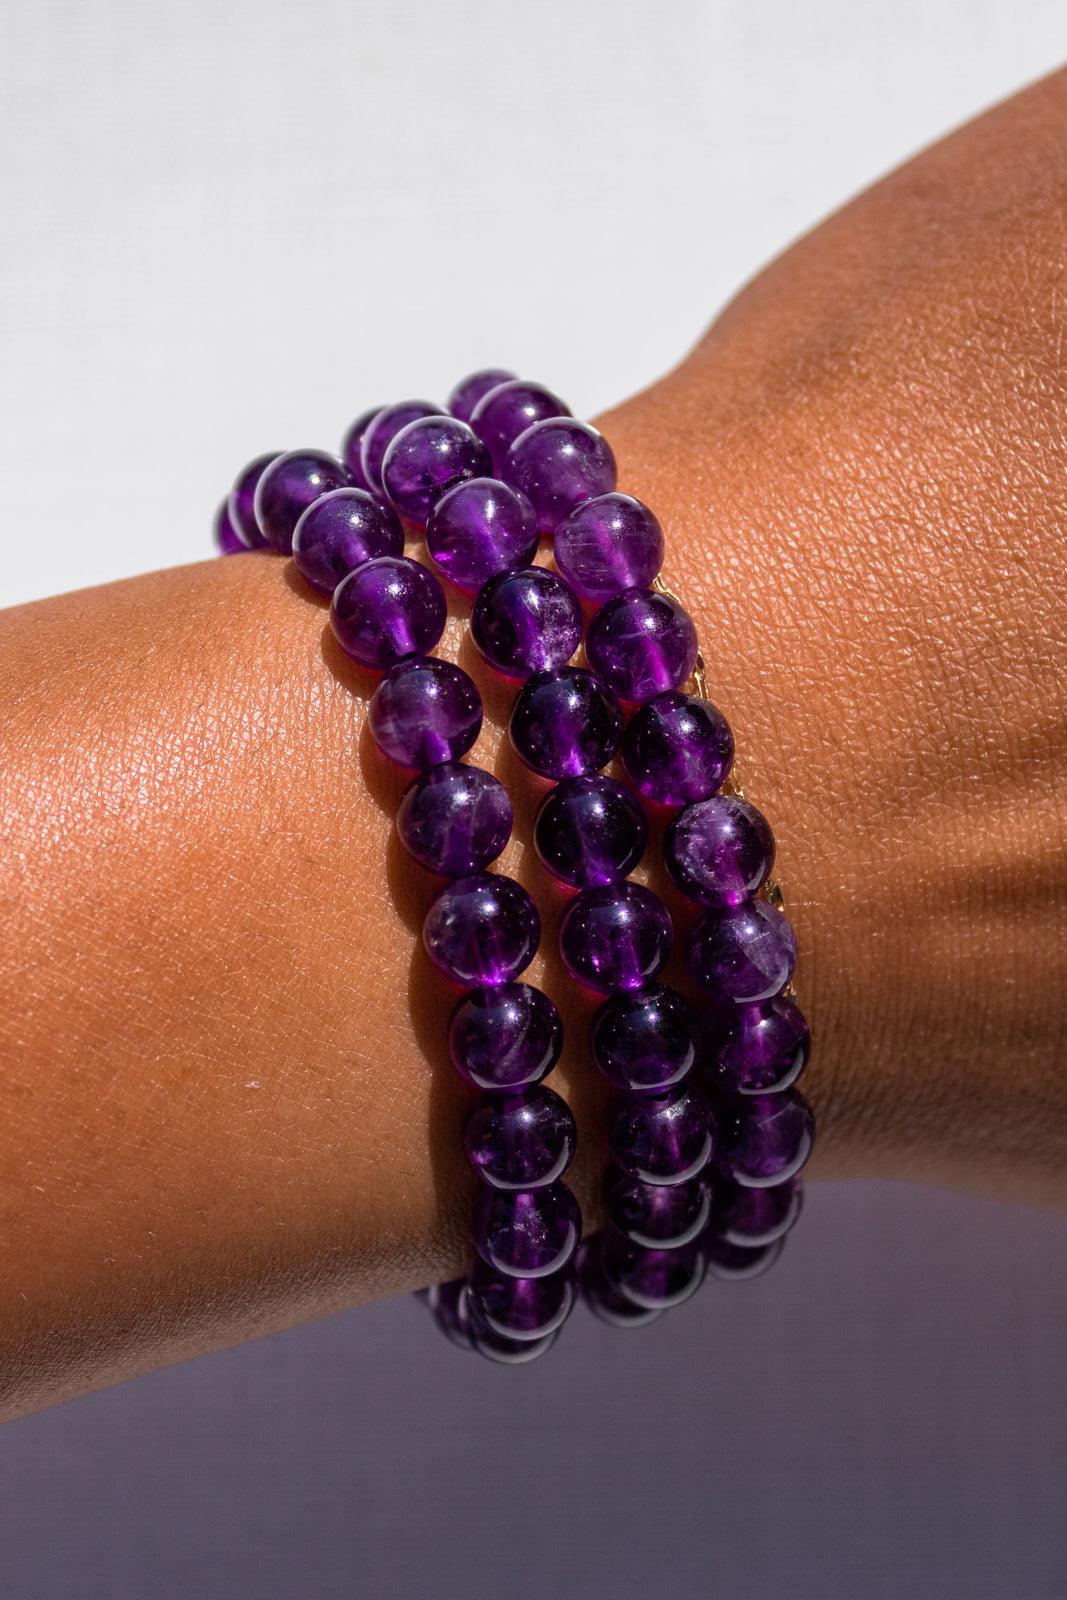 Large Bead Matte Amethyst Bracelet - Alignment with Higher Self - Minera  Emporium Crystal & Mineral Shop